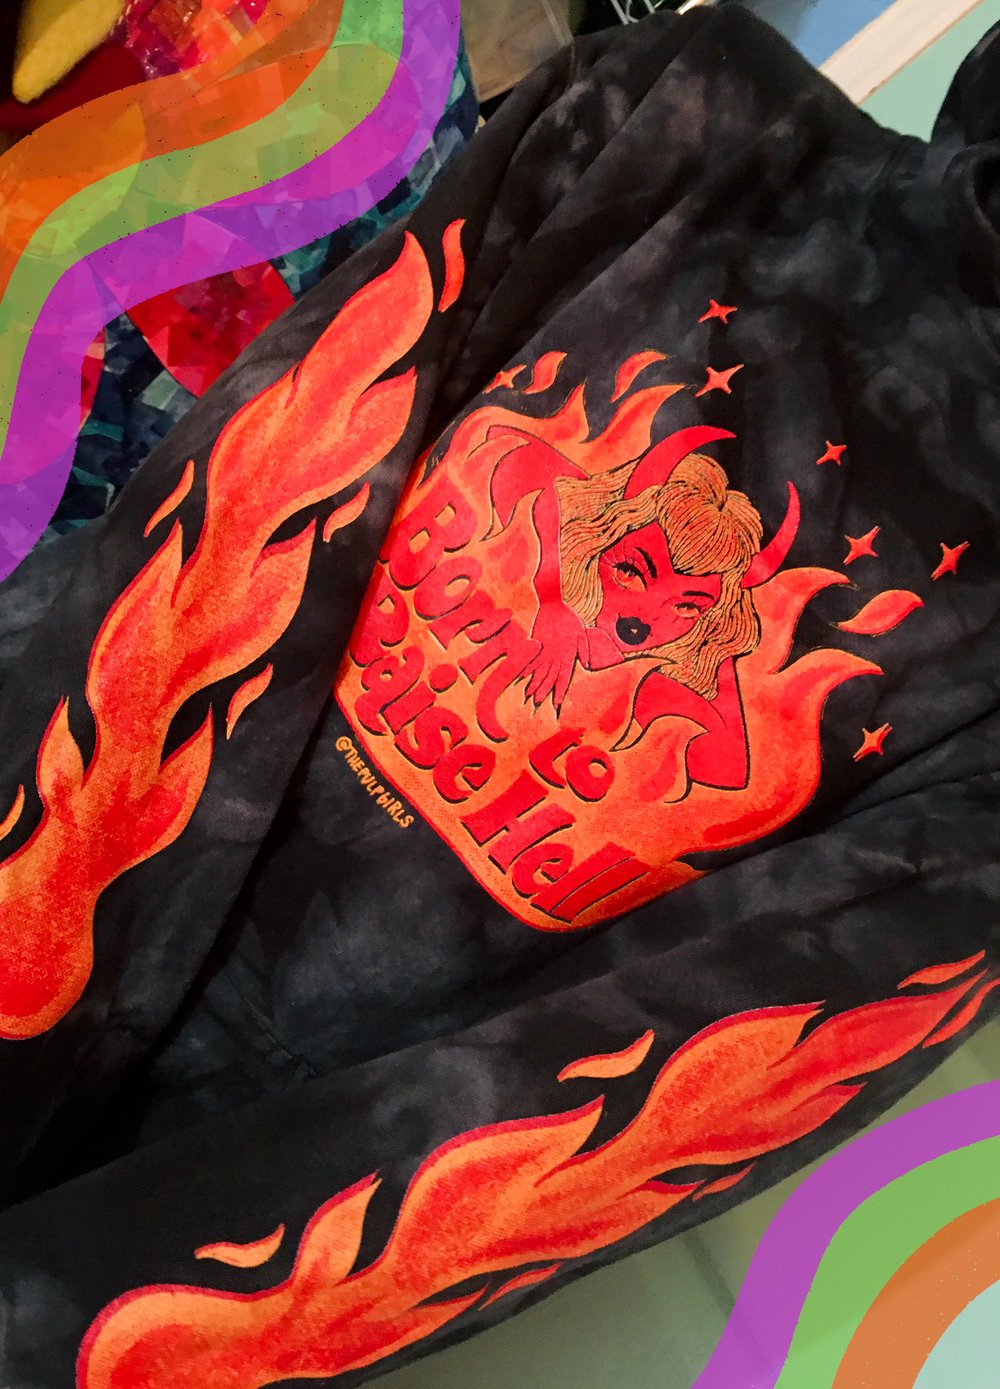 Image of BORN TO RAISE HELL HOODIE